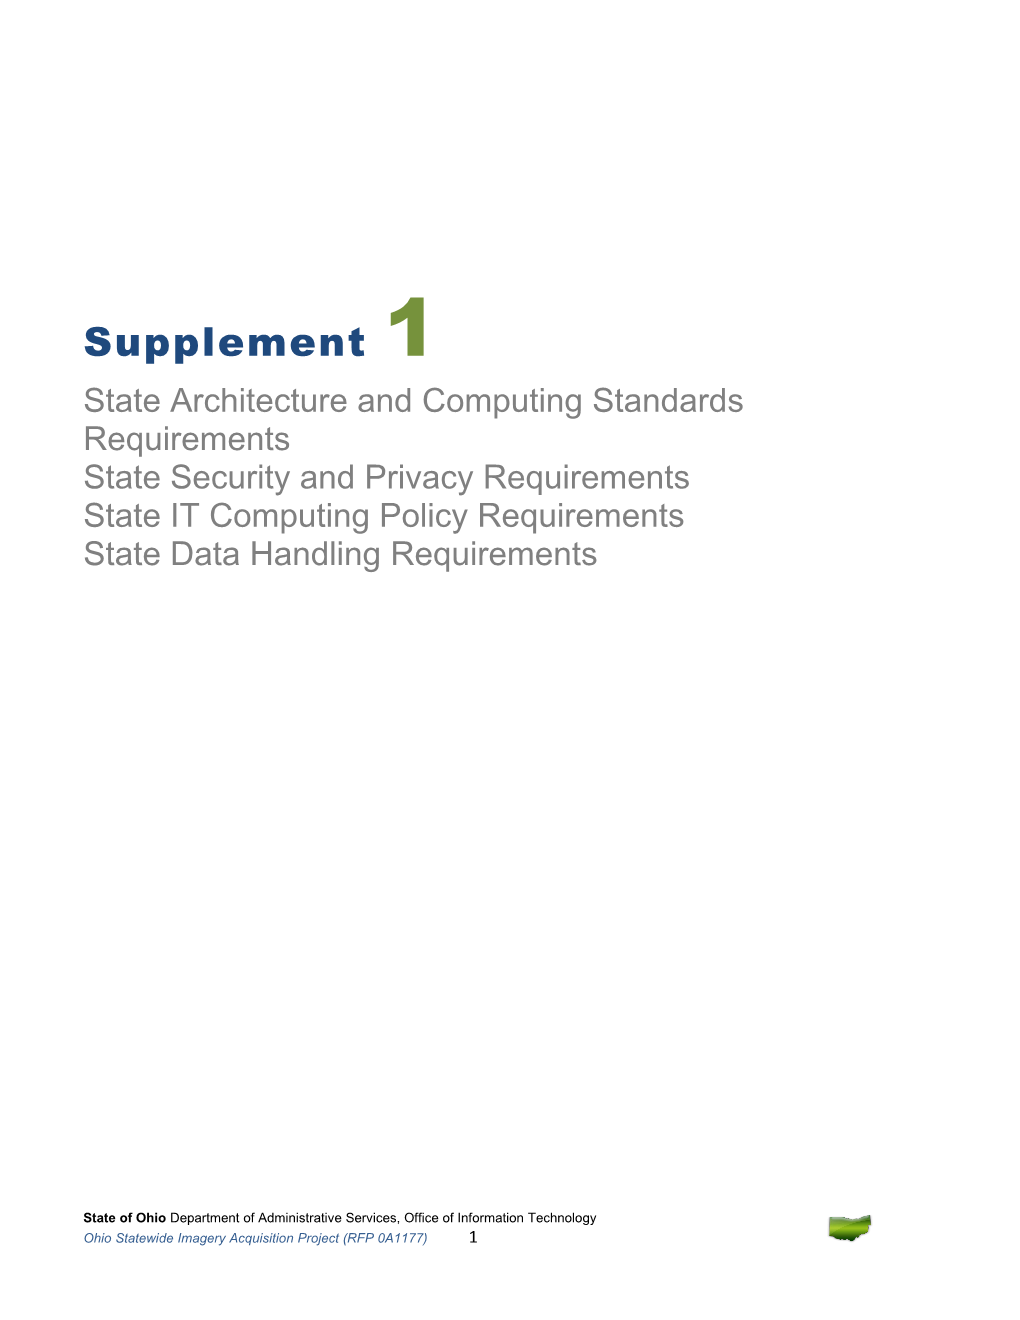 State Architecture and Computing Standards Requirements